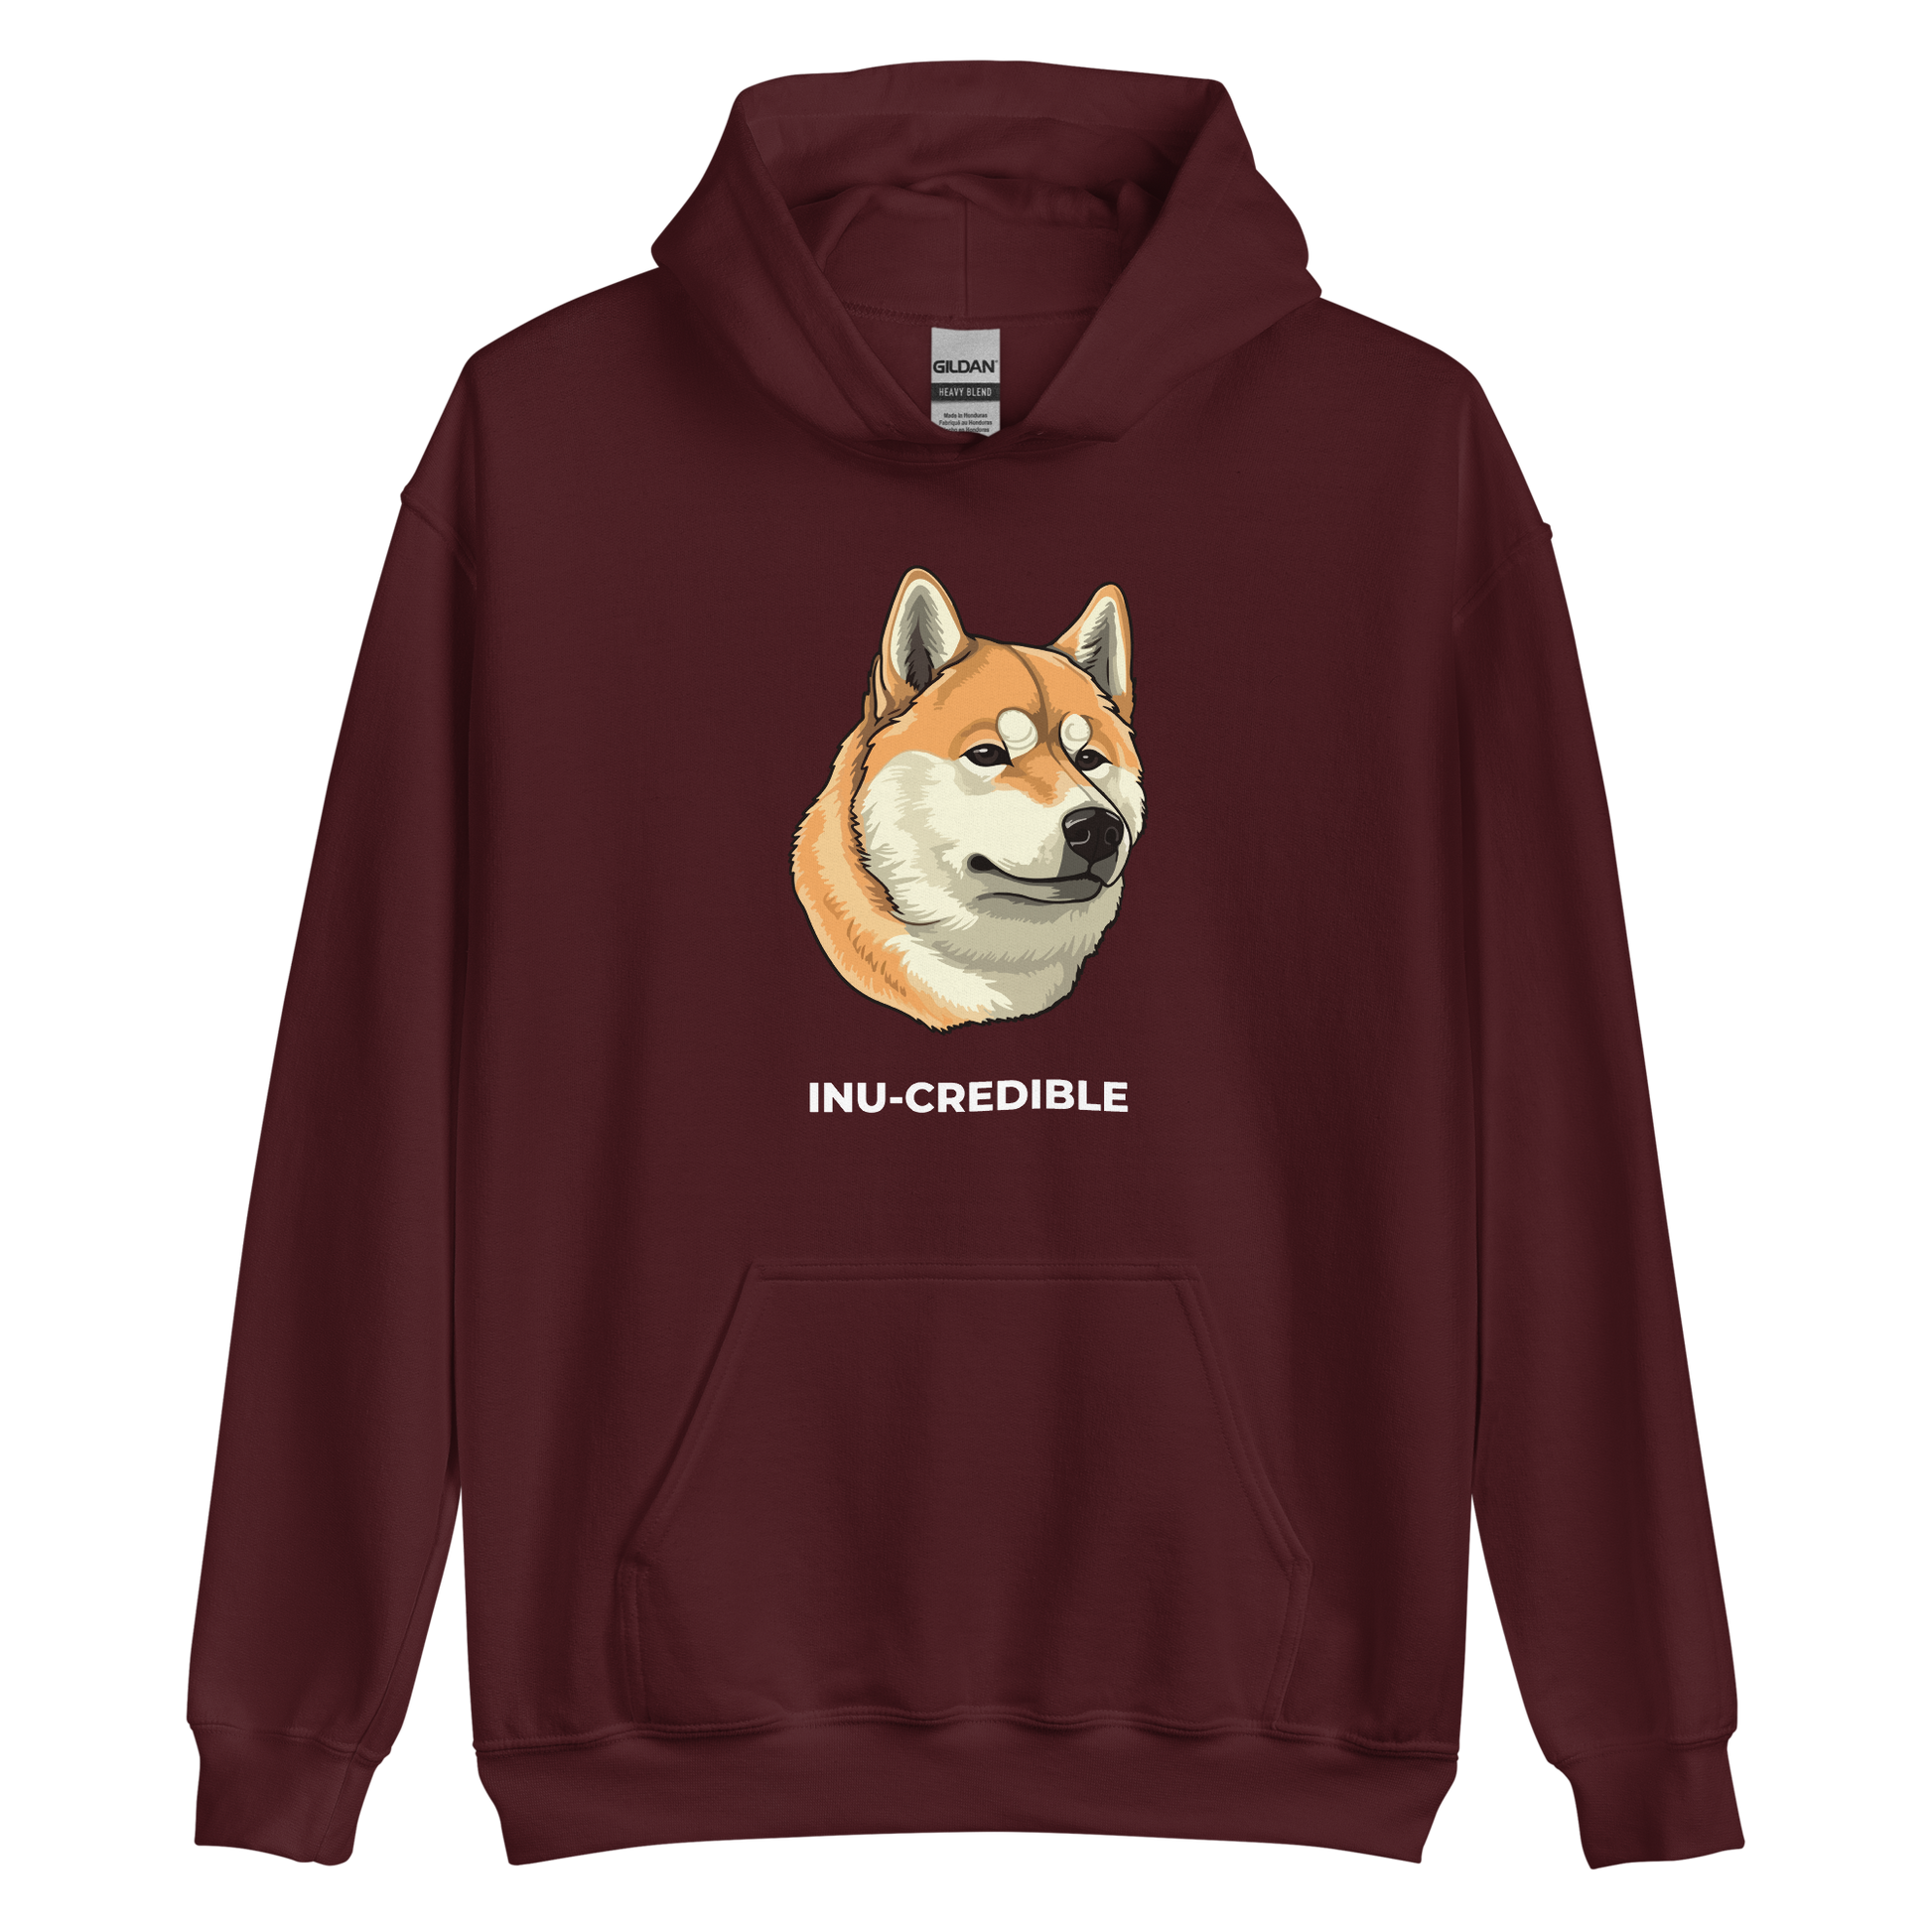 Maroon Shiba Inu Hoodie featuring the Inu-Credible graphic on the chest - Funny Graphic Shiba Inu Hoodies - Boozy Fox